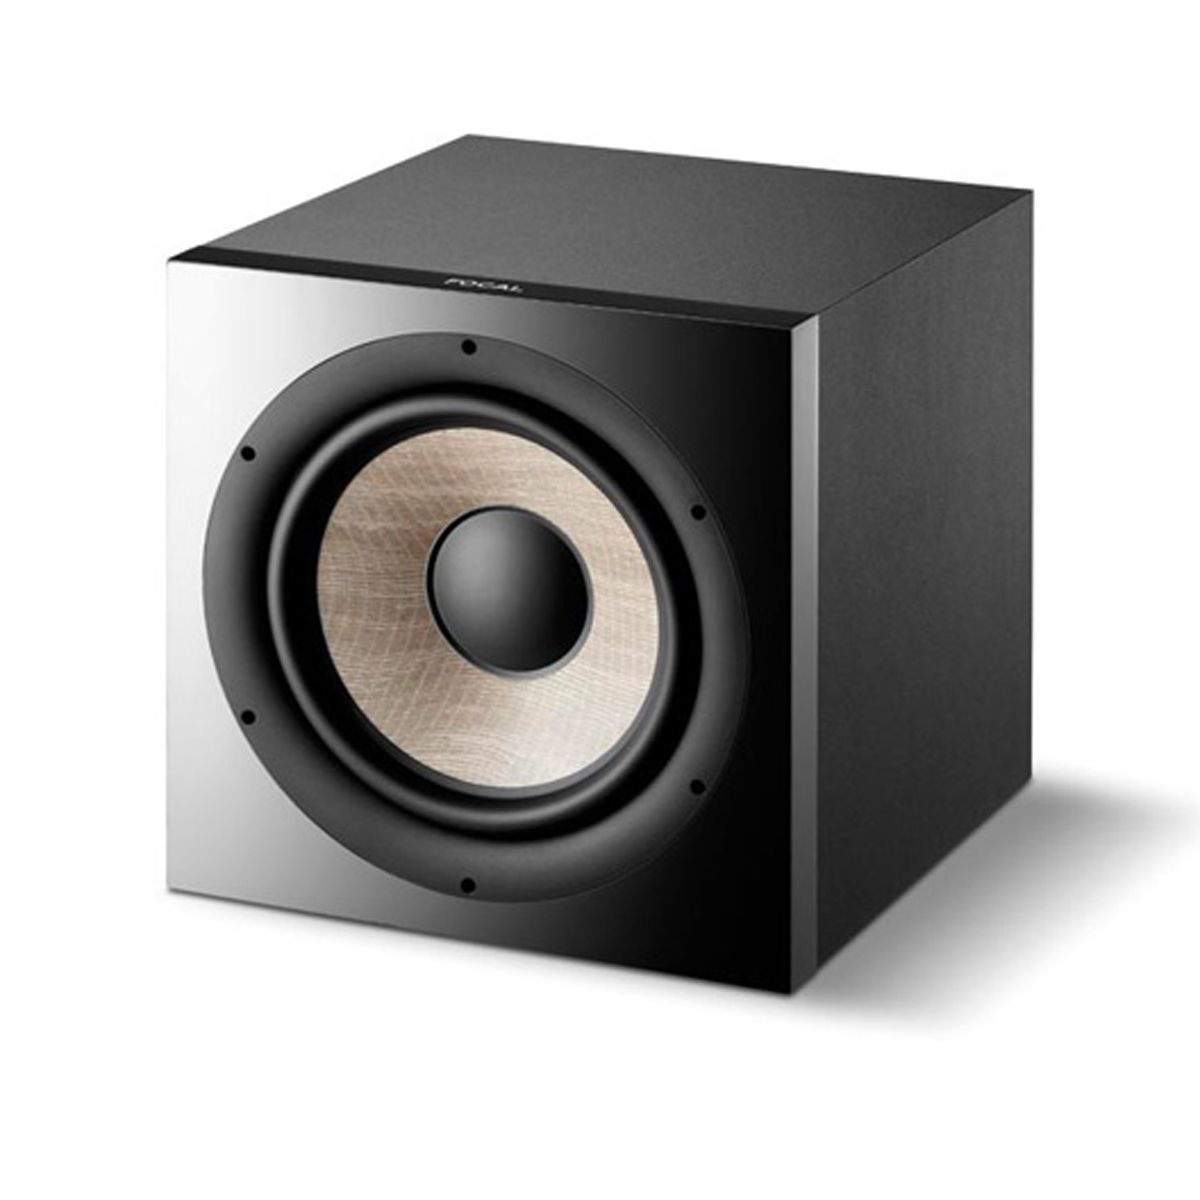 Focal Sub 1000 F High Power Subwoofer